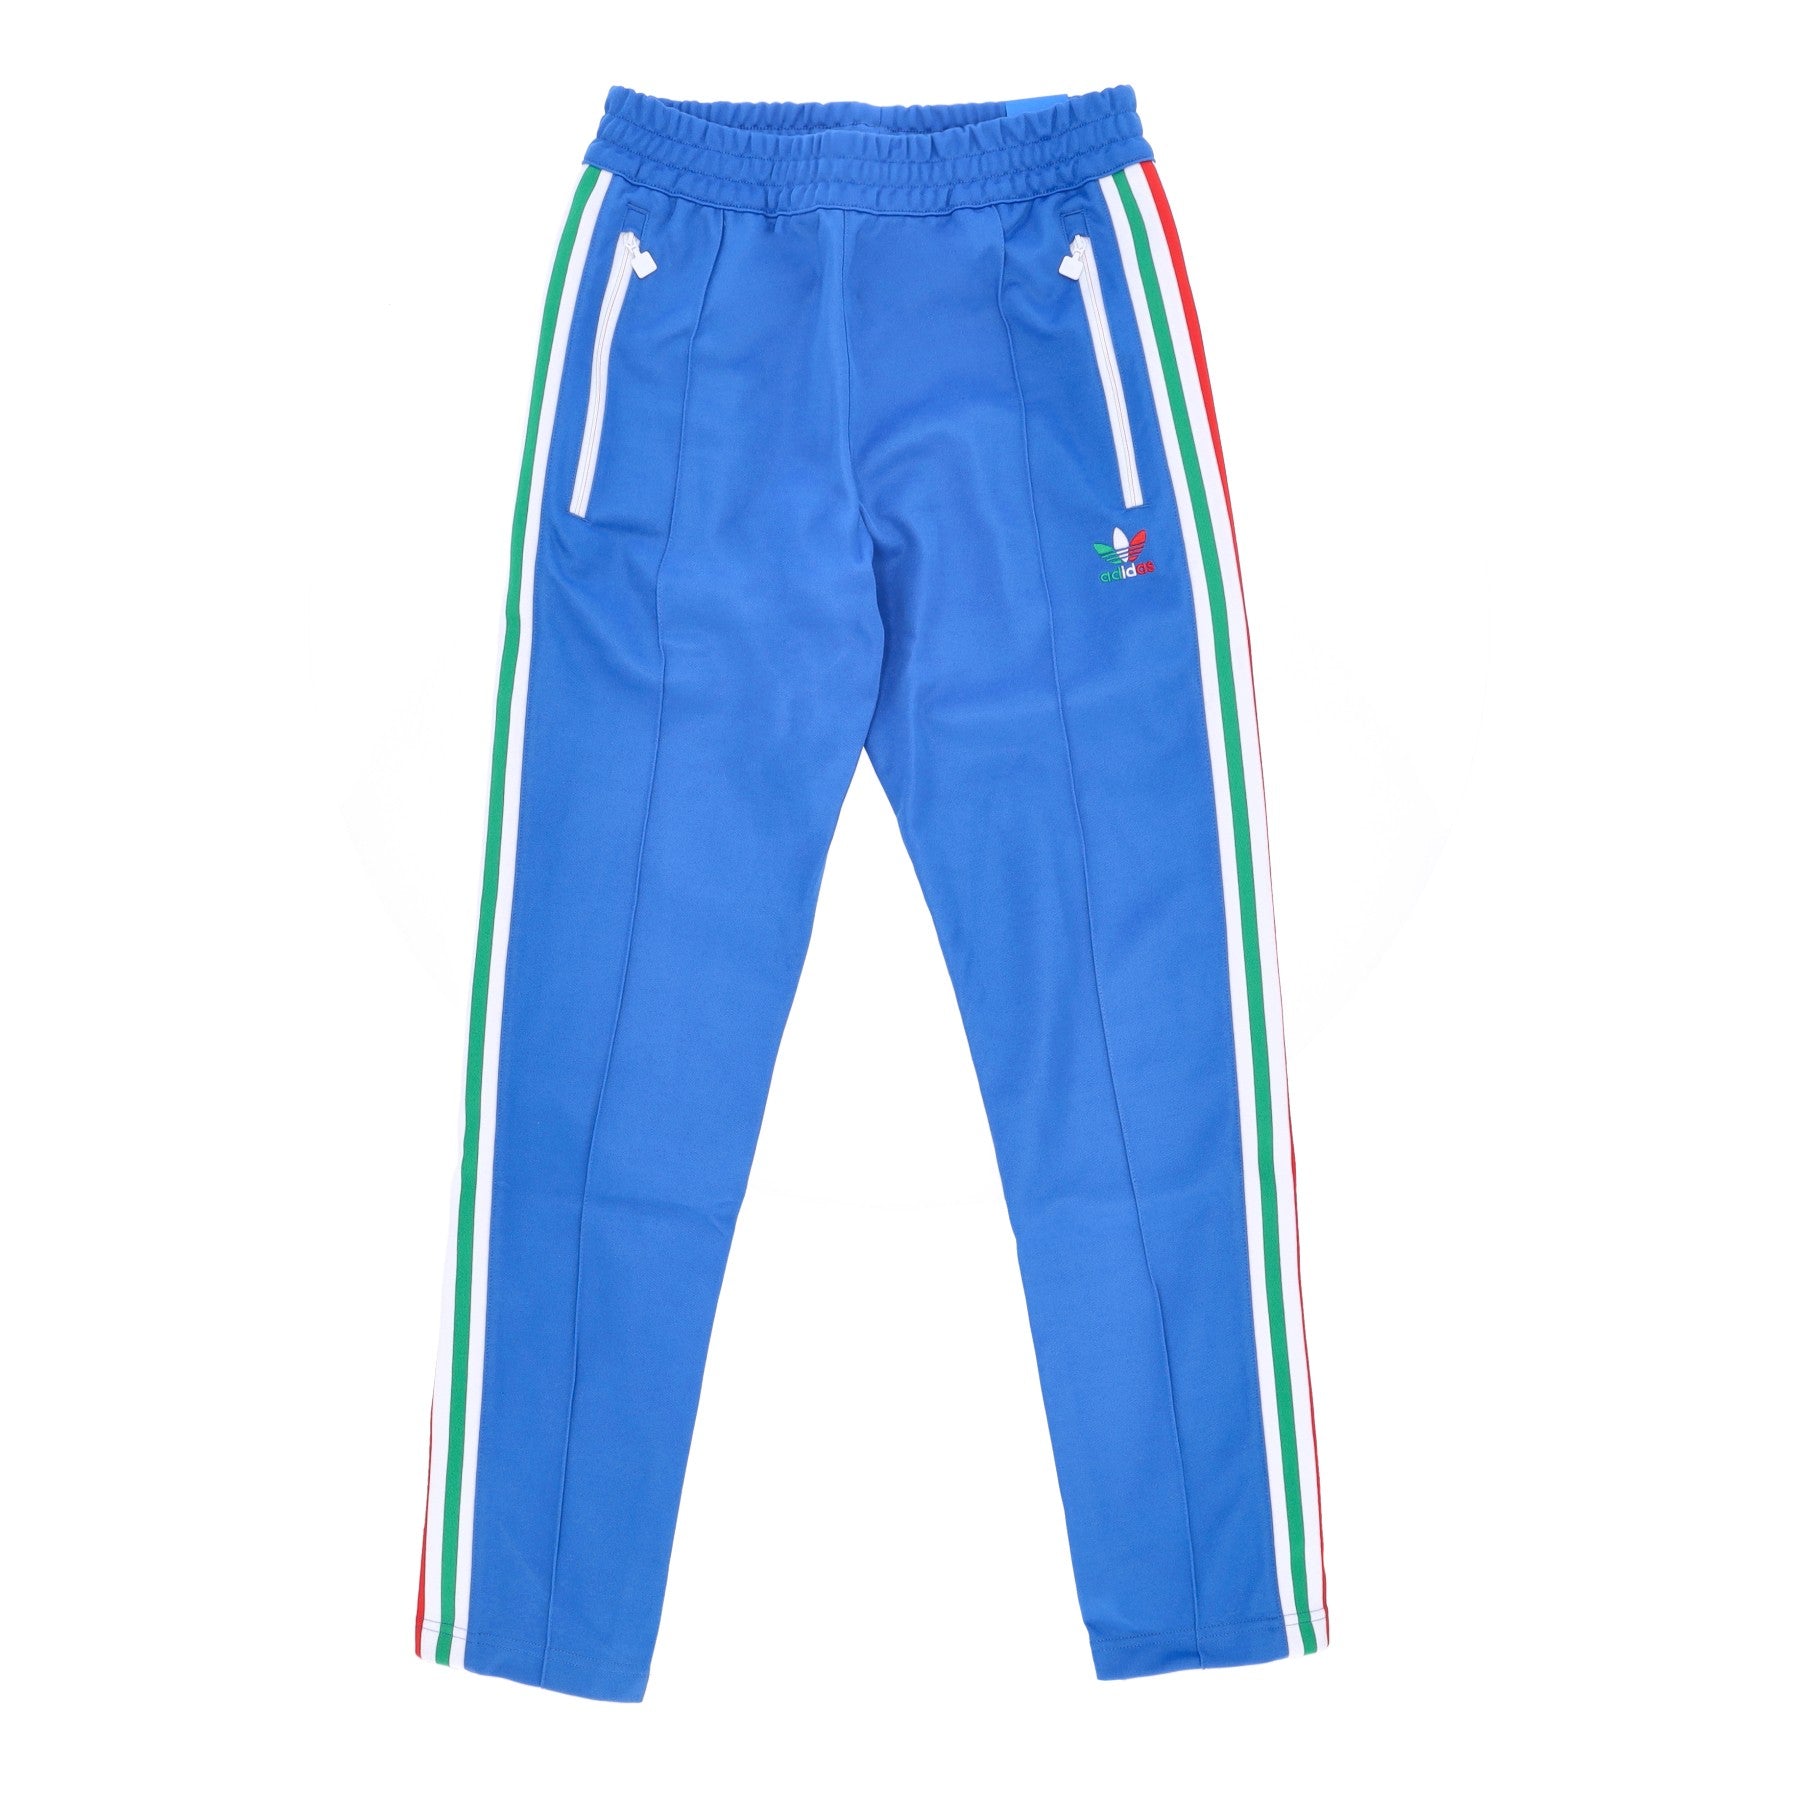 Men's Fb Nations Track Pants Bright Royal/white/red/green